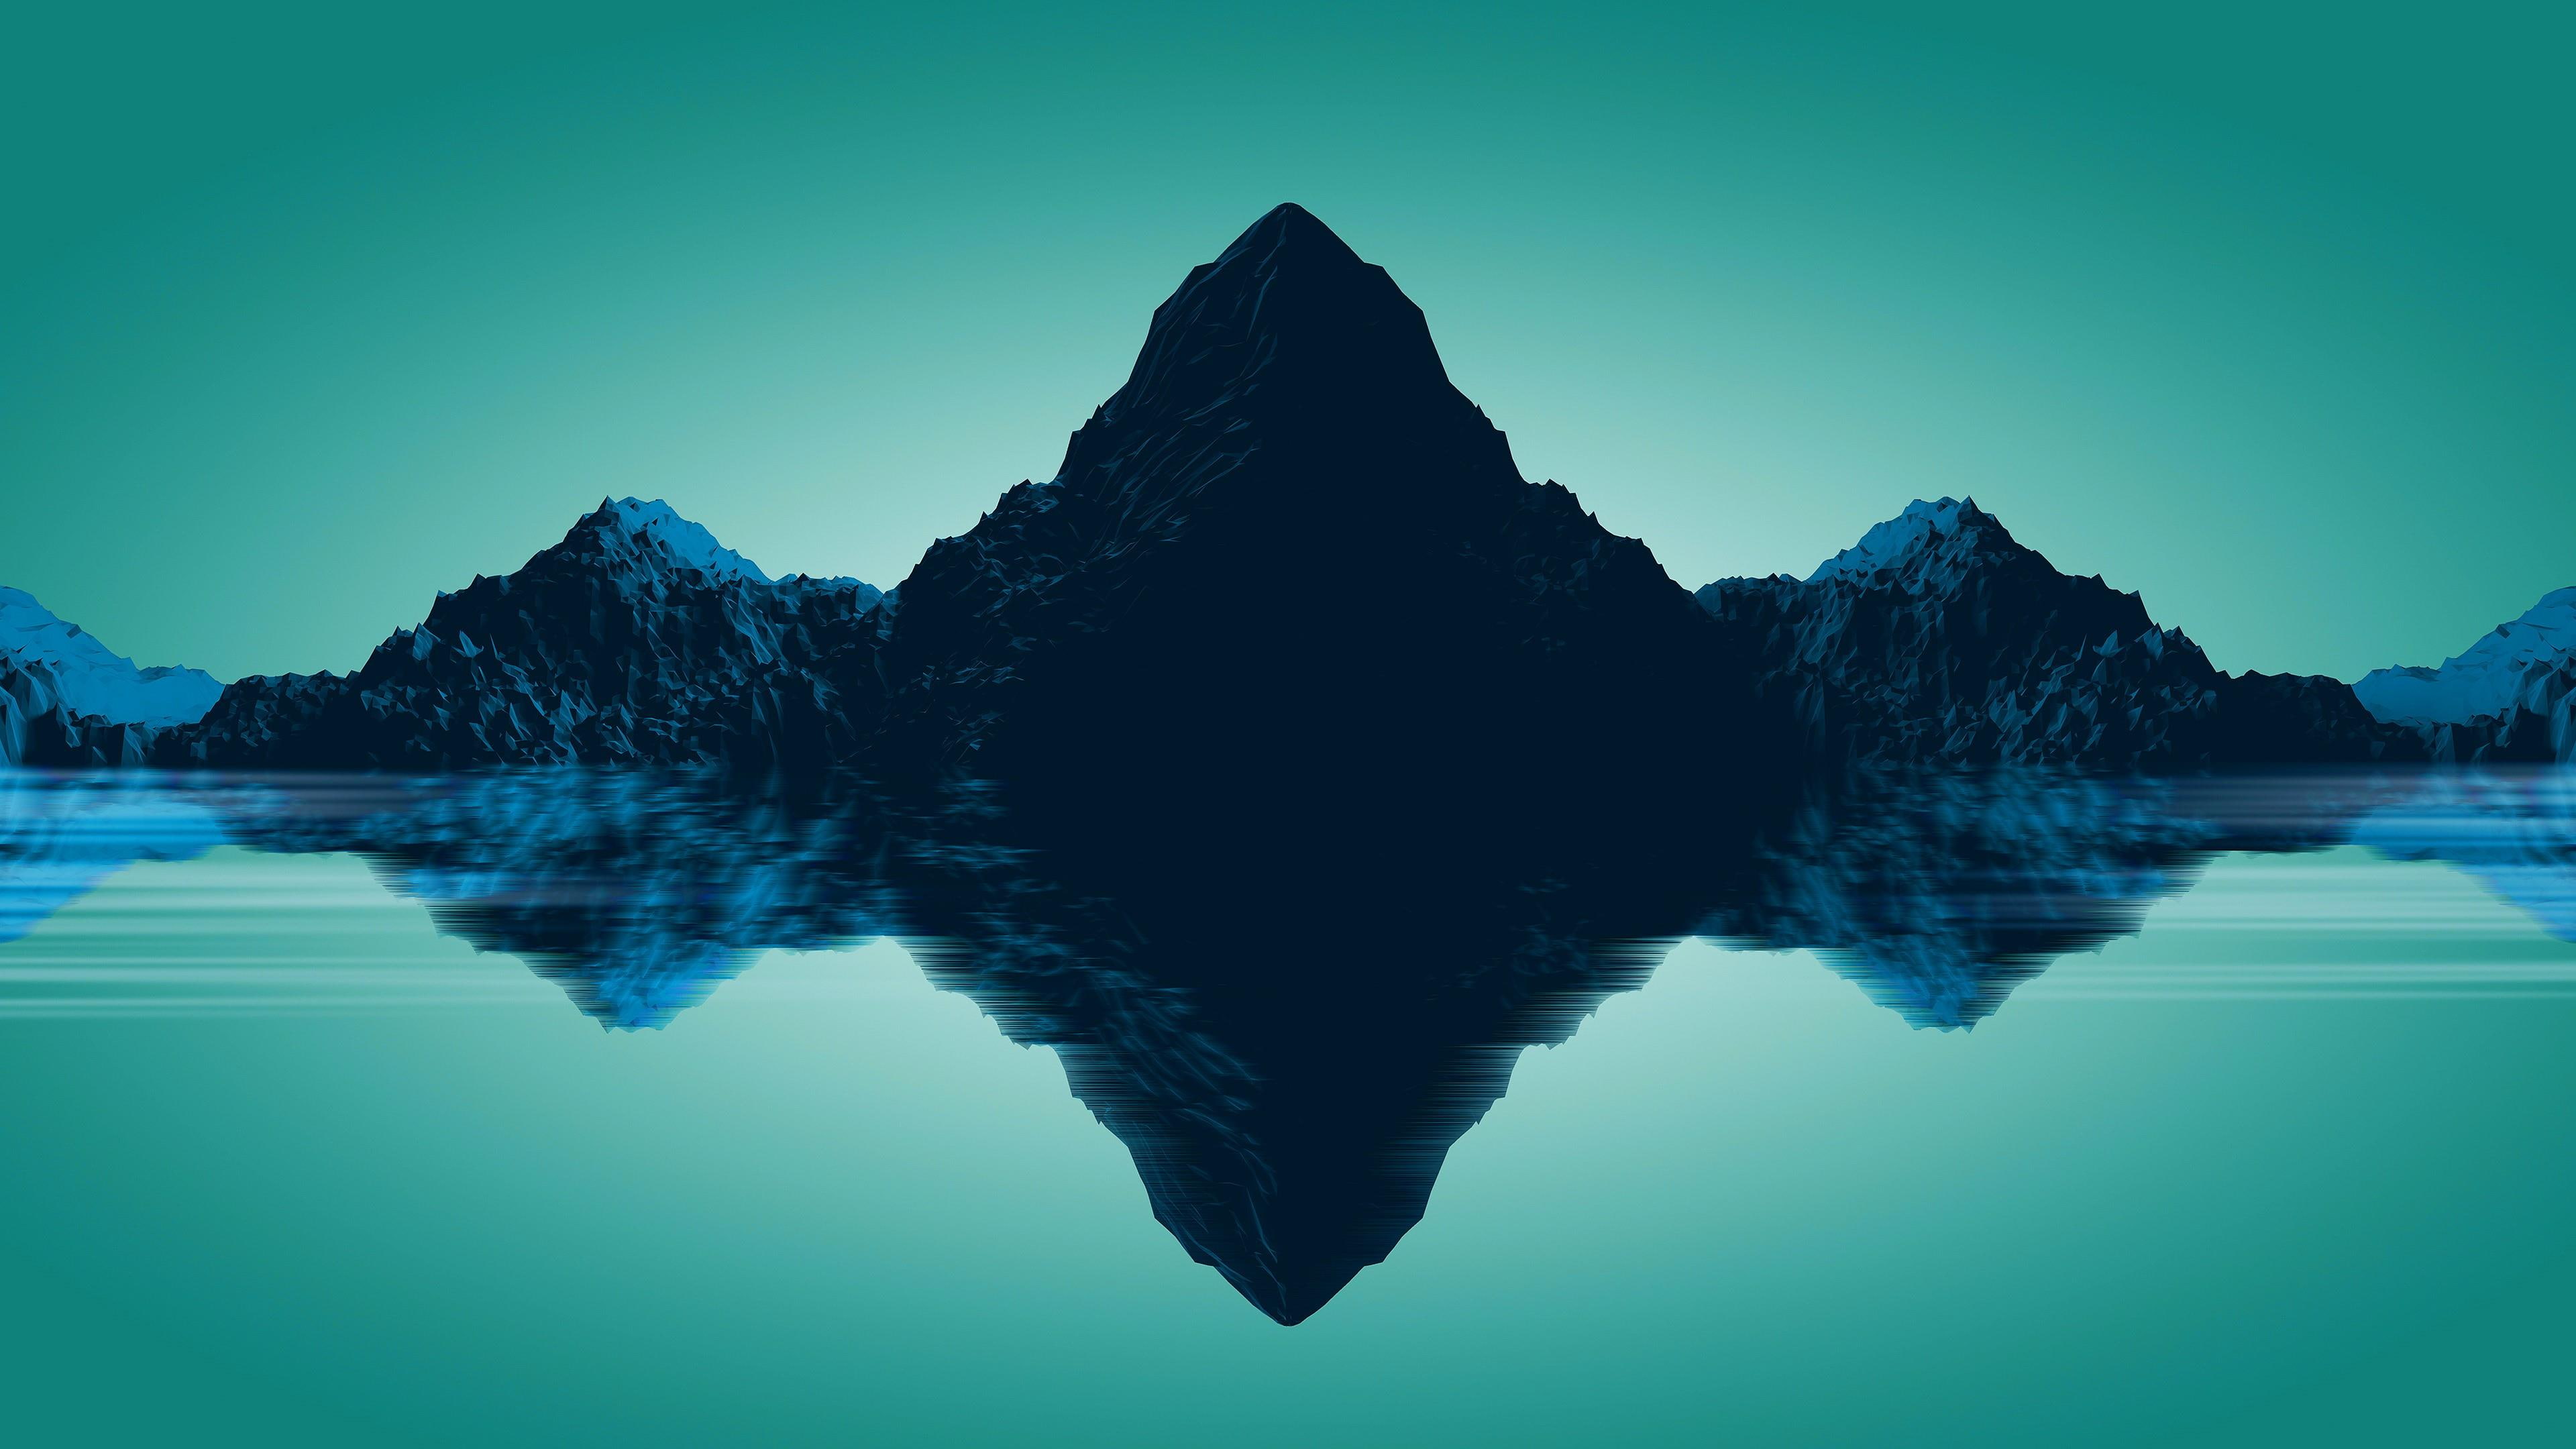 mountain, low poly art, lowpoly, mountains, reflection, digital art